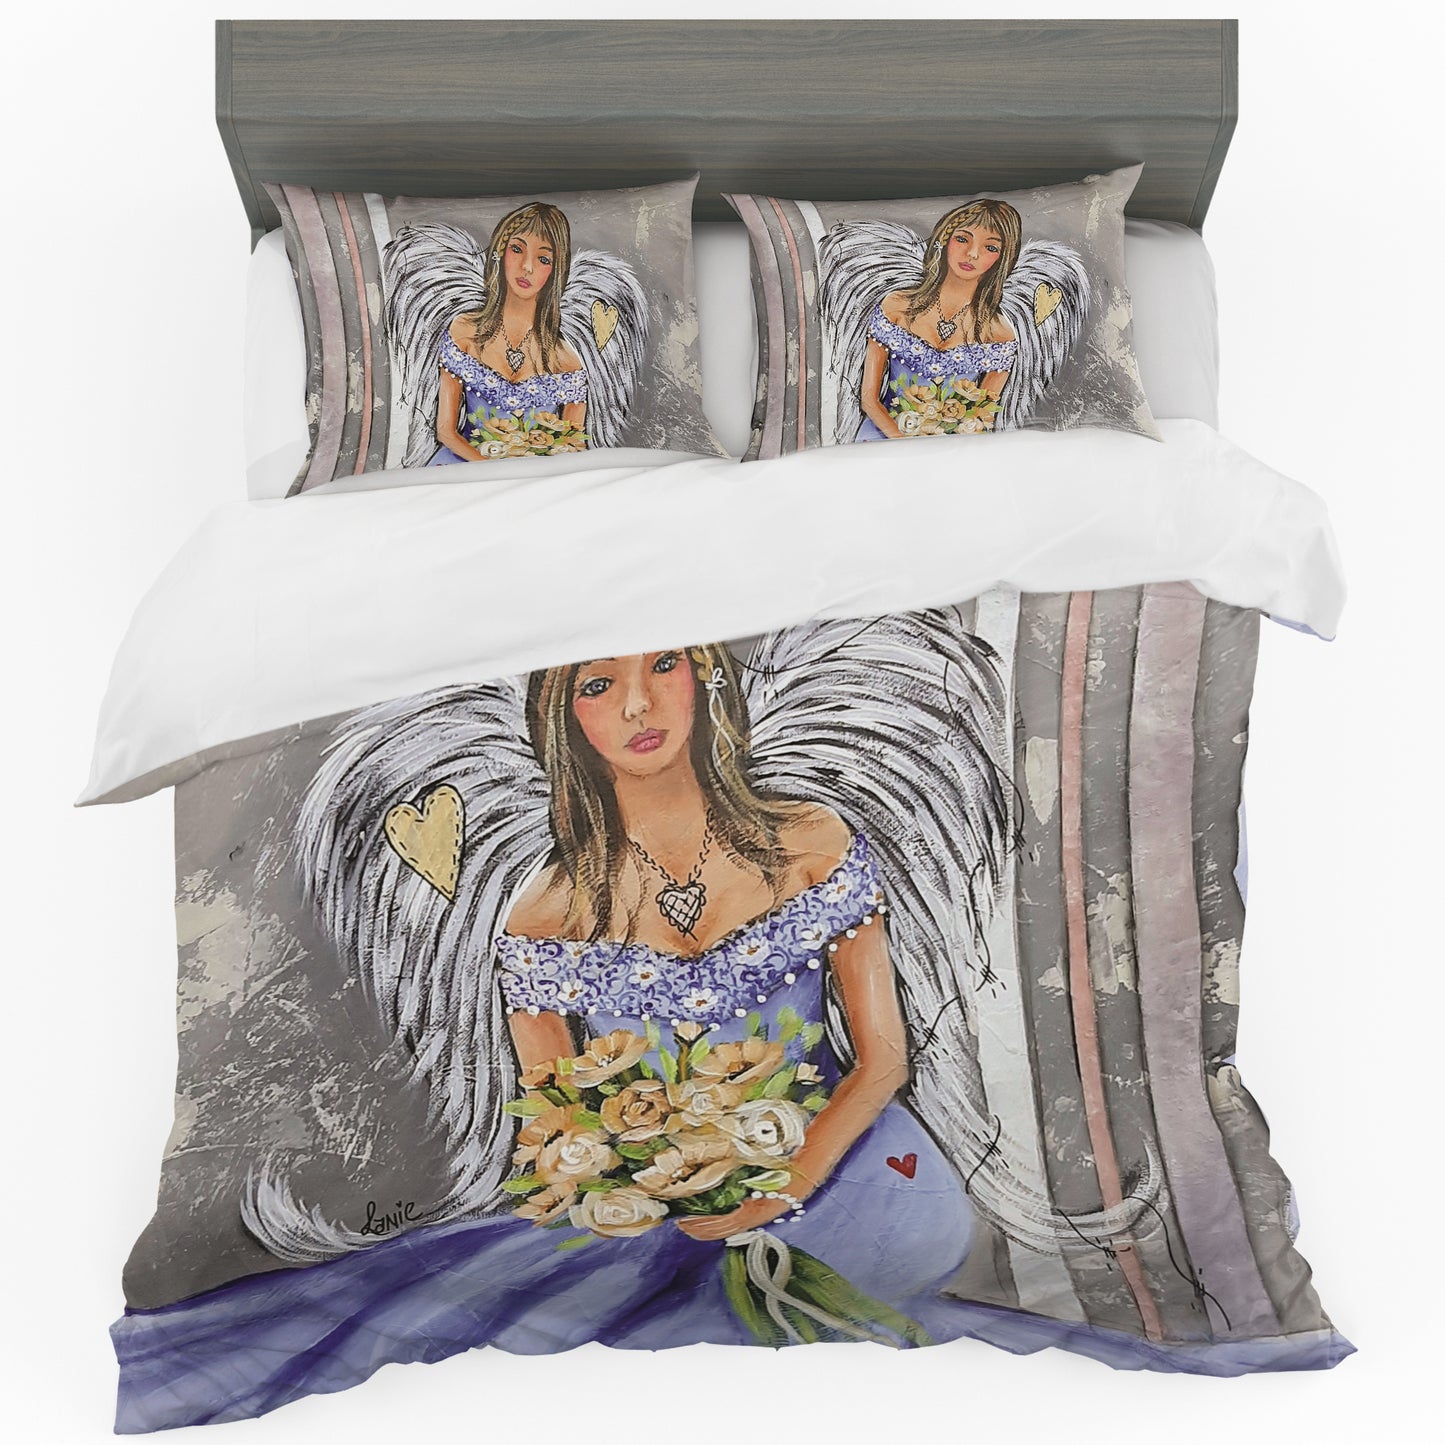 Blue Angel with Flowers Duvet Cover Set By Lanies Art